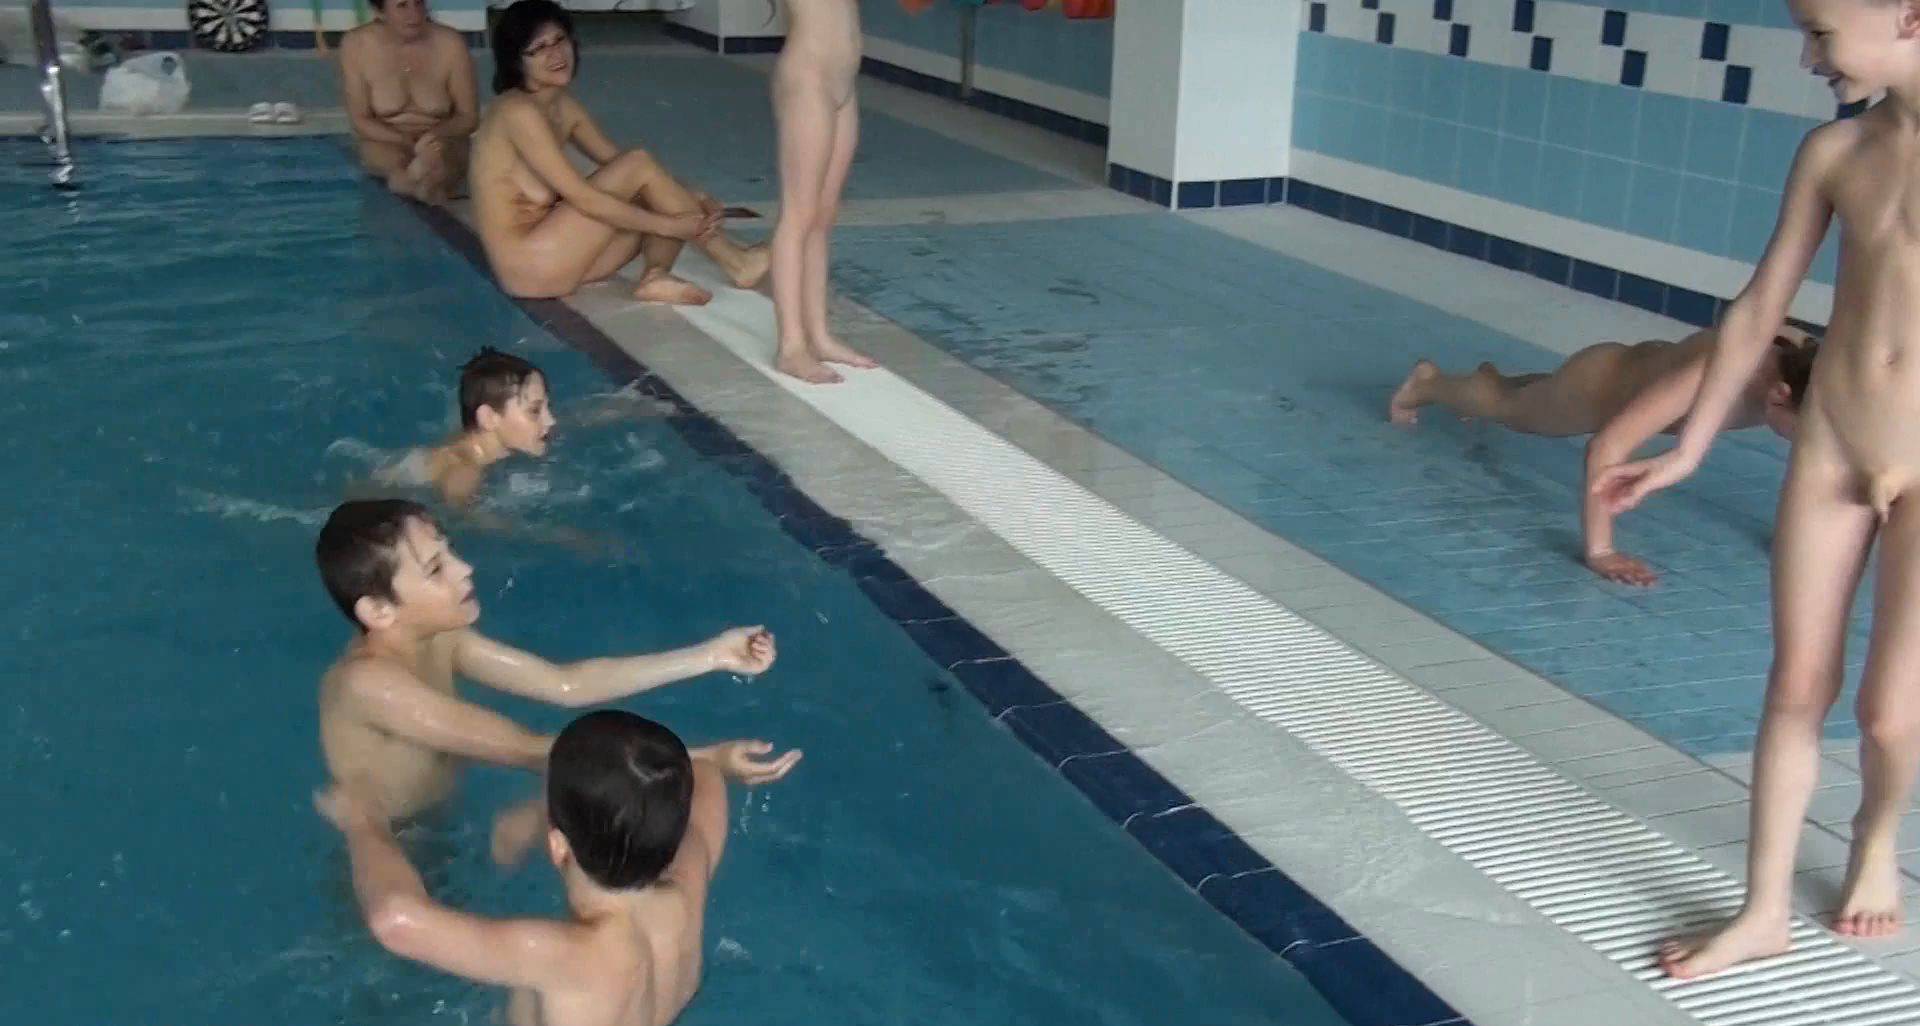 Activity Pool - Pure Family Nudism - 2